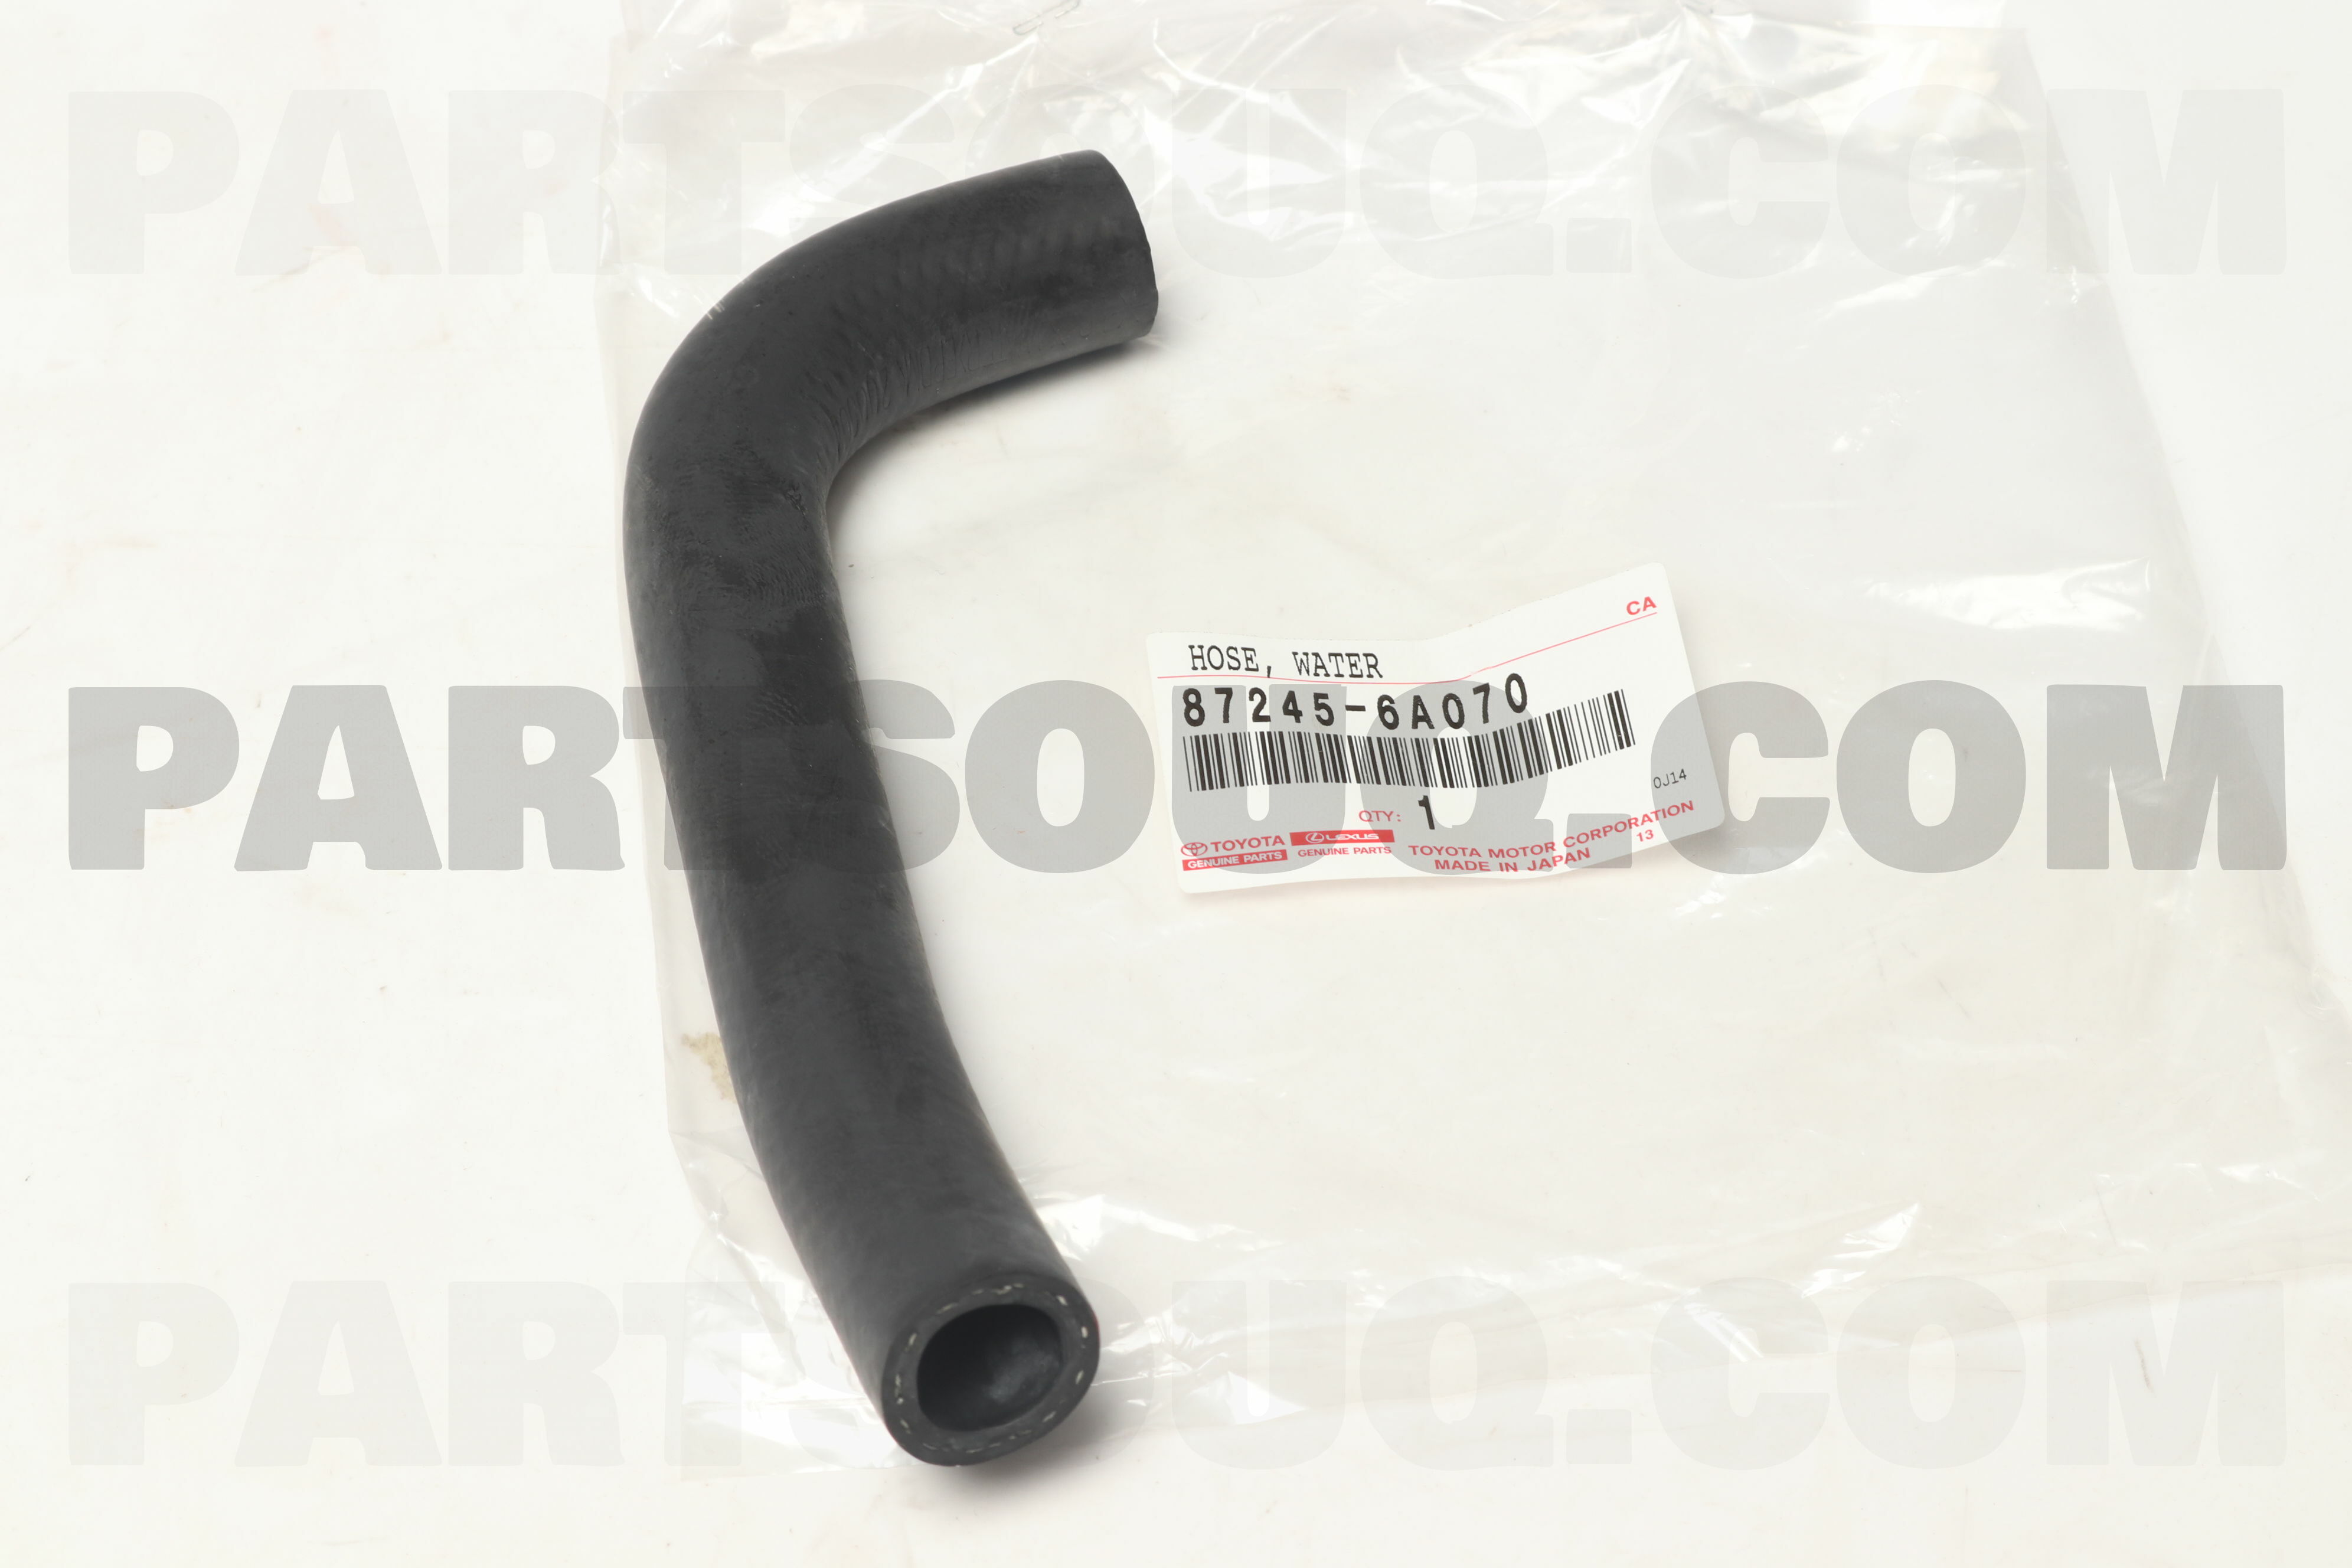 OUTLET B HEATER WATER 87245-6A190 Toyota OEM Genuine HOSE